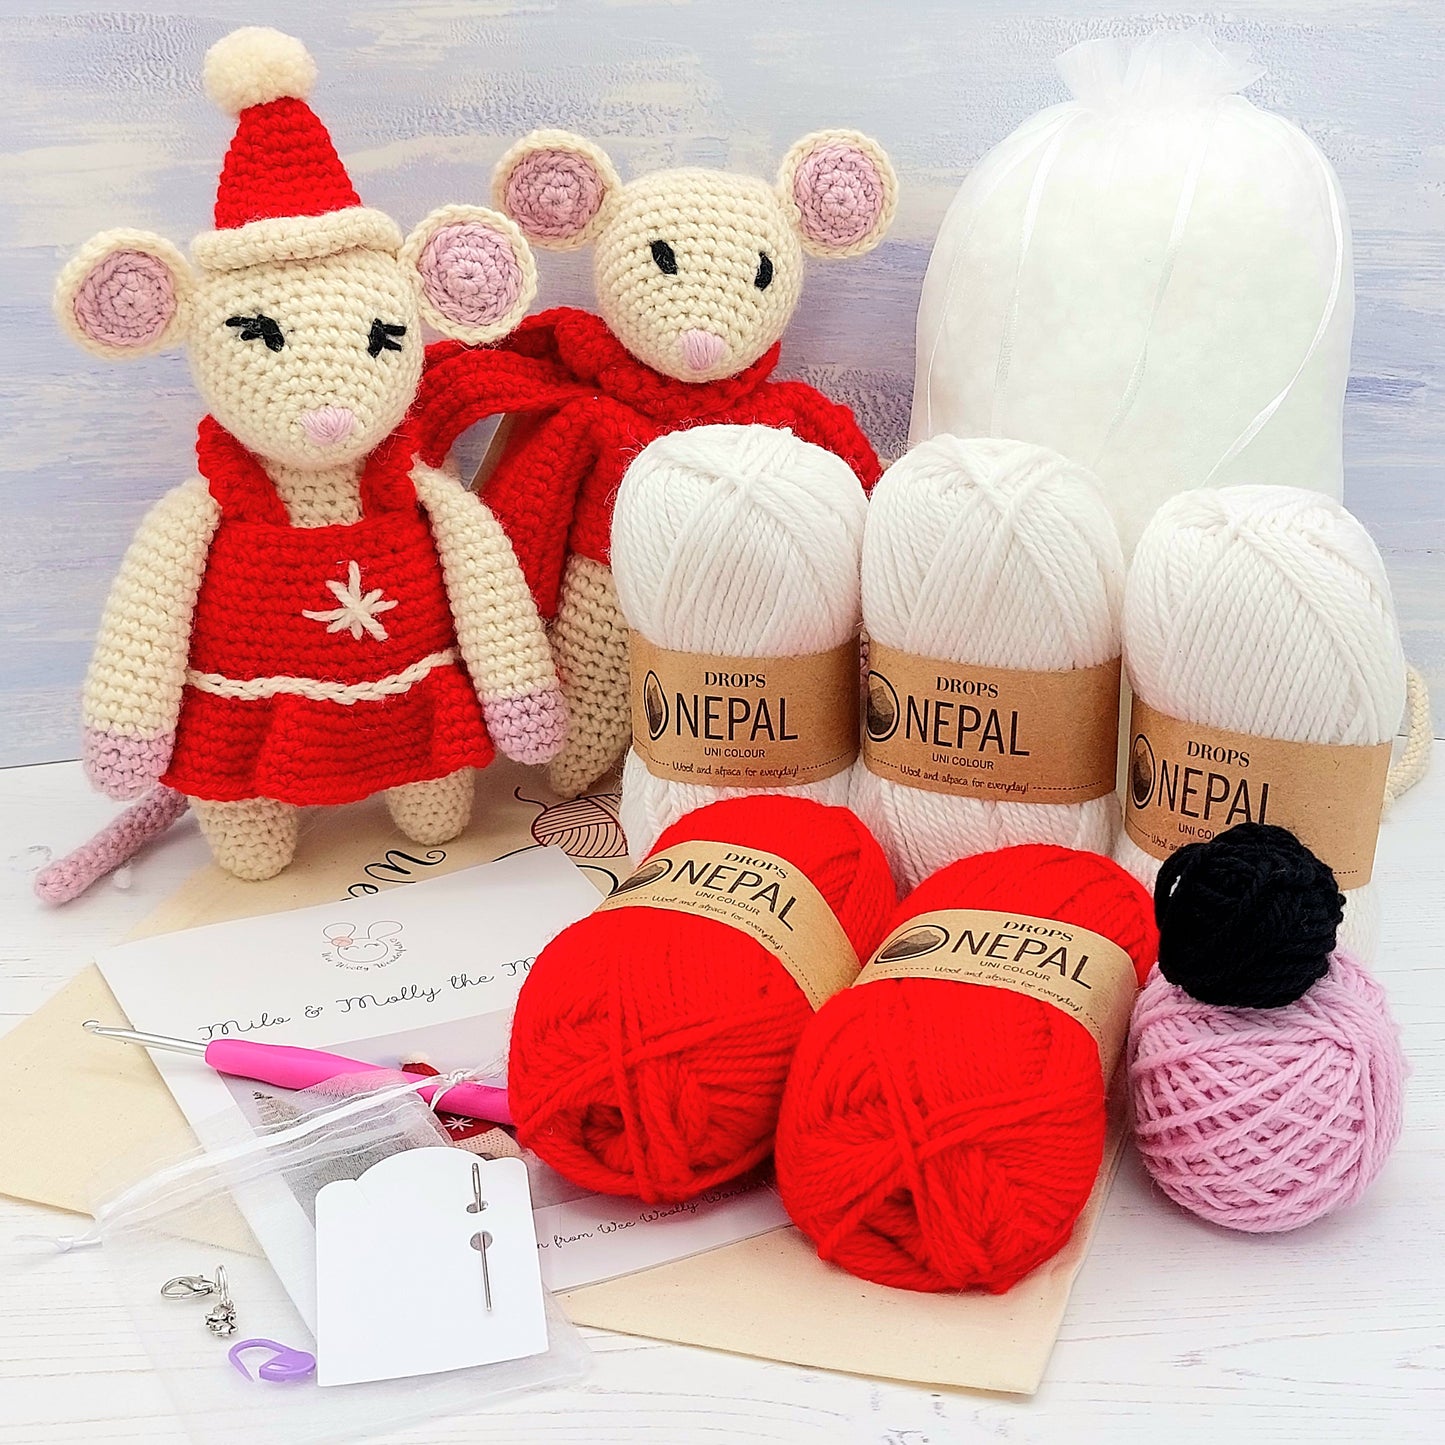 Christmas Mice Crochet Kit Contents - White and Red Wool, Pattern, crochet hook and filling